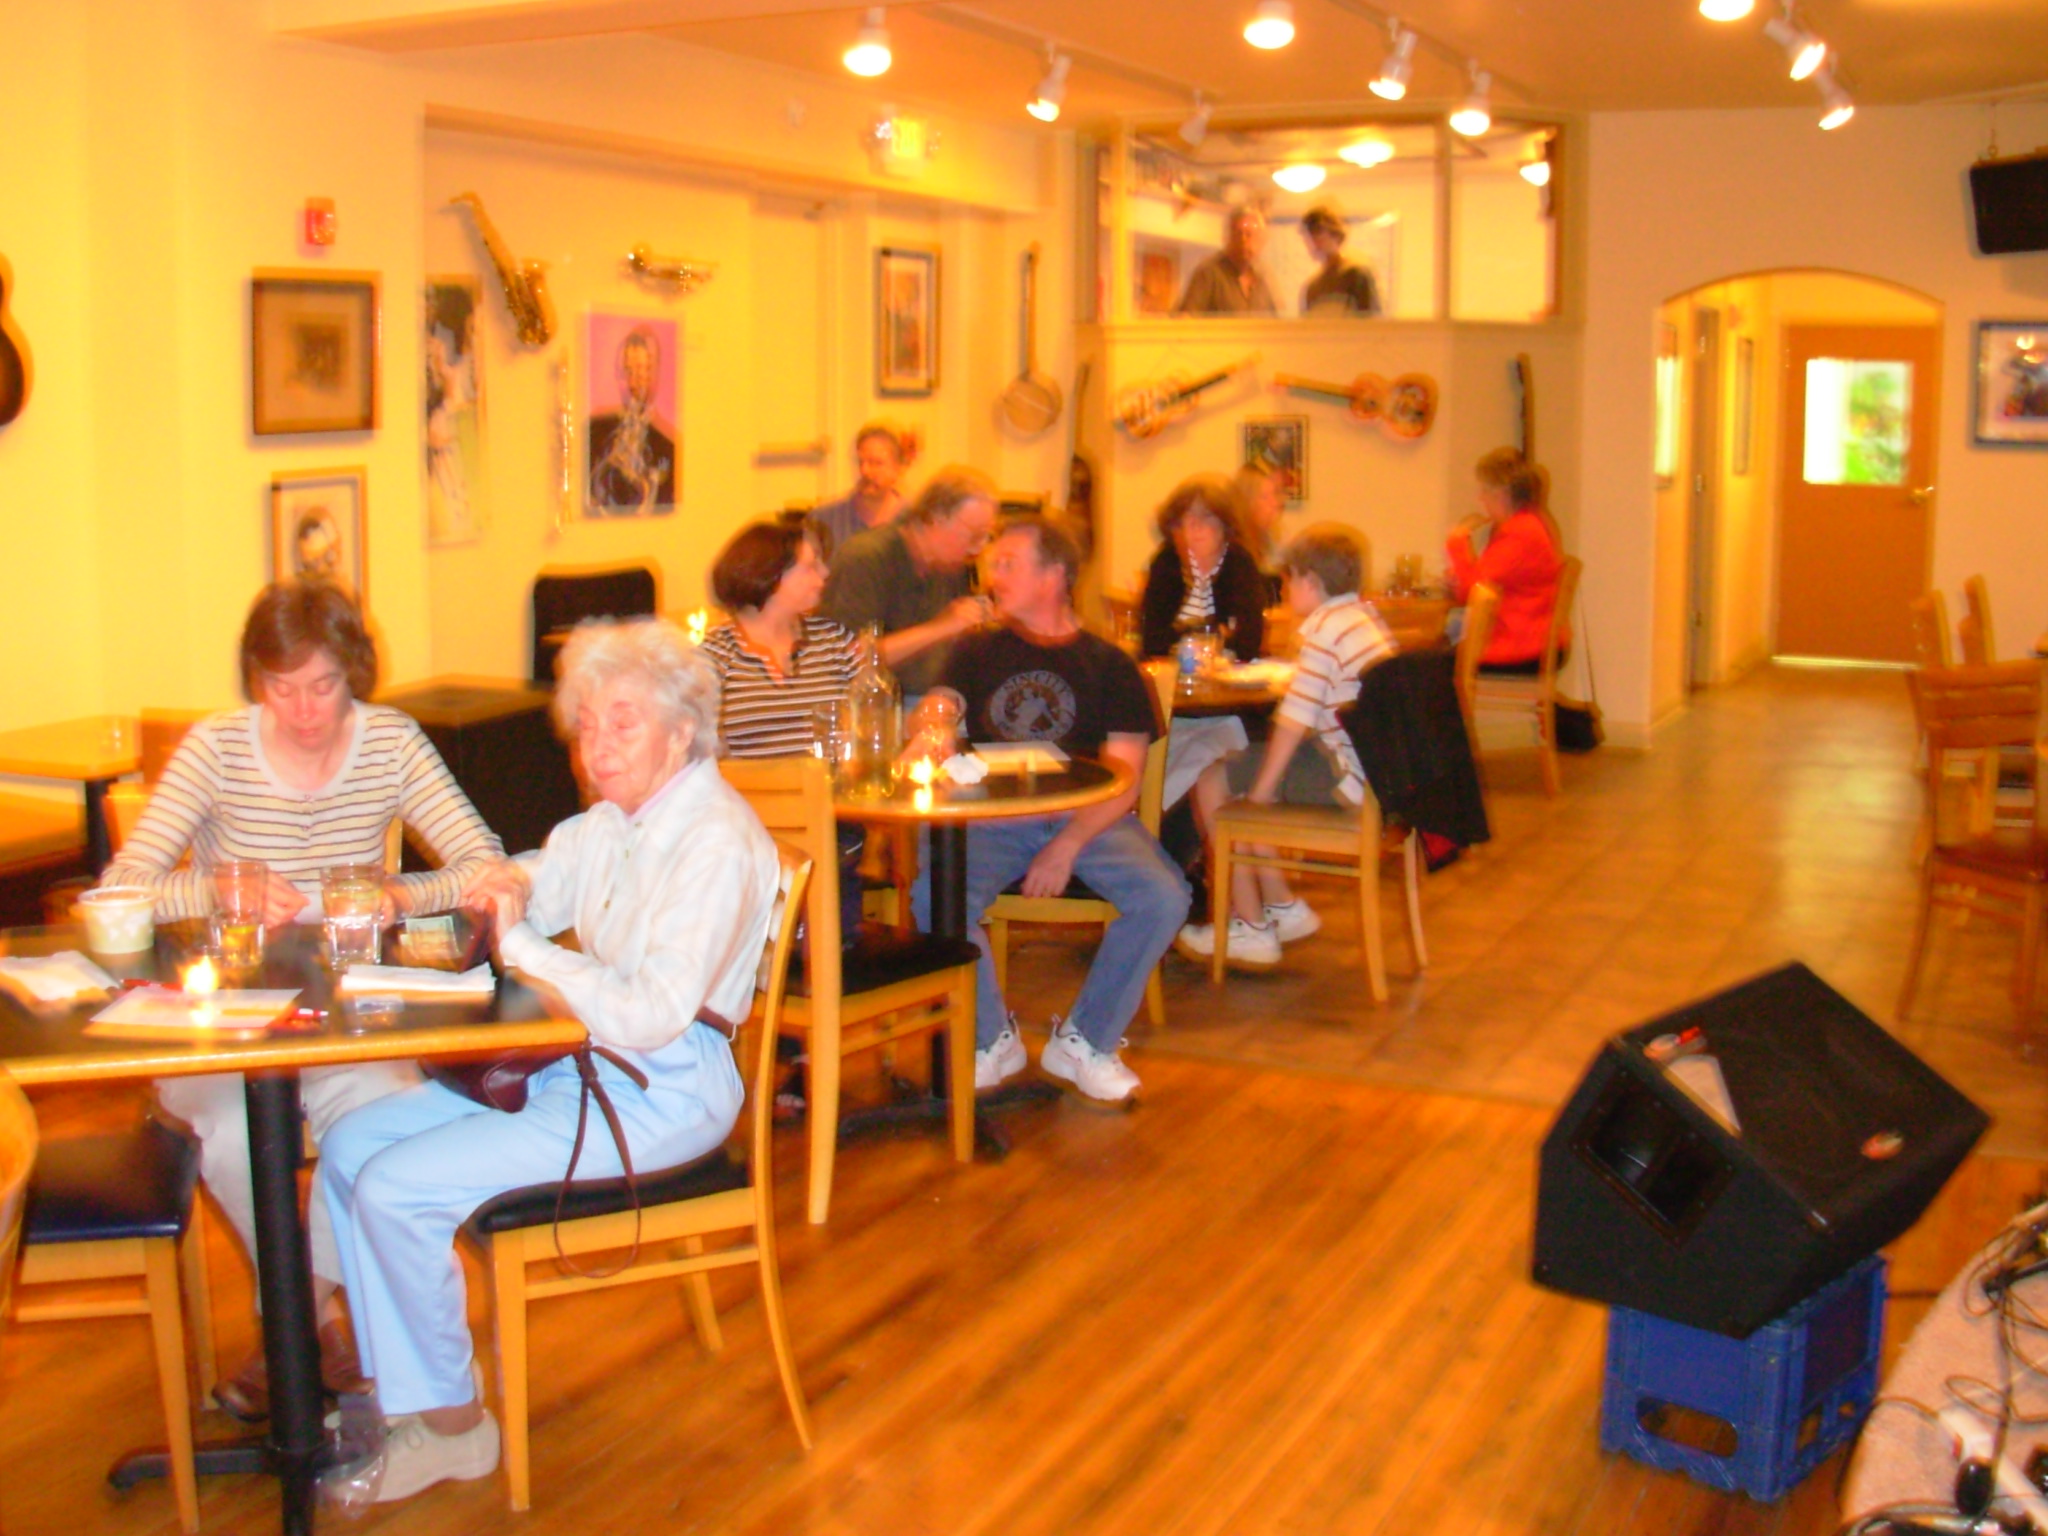 The seating area at the Good Life Cafe in Carlisle
